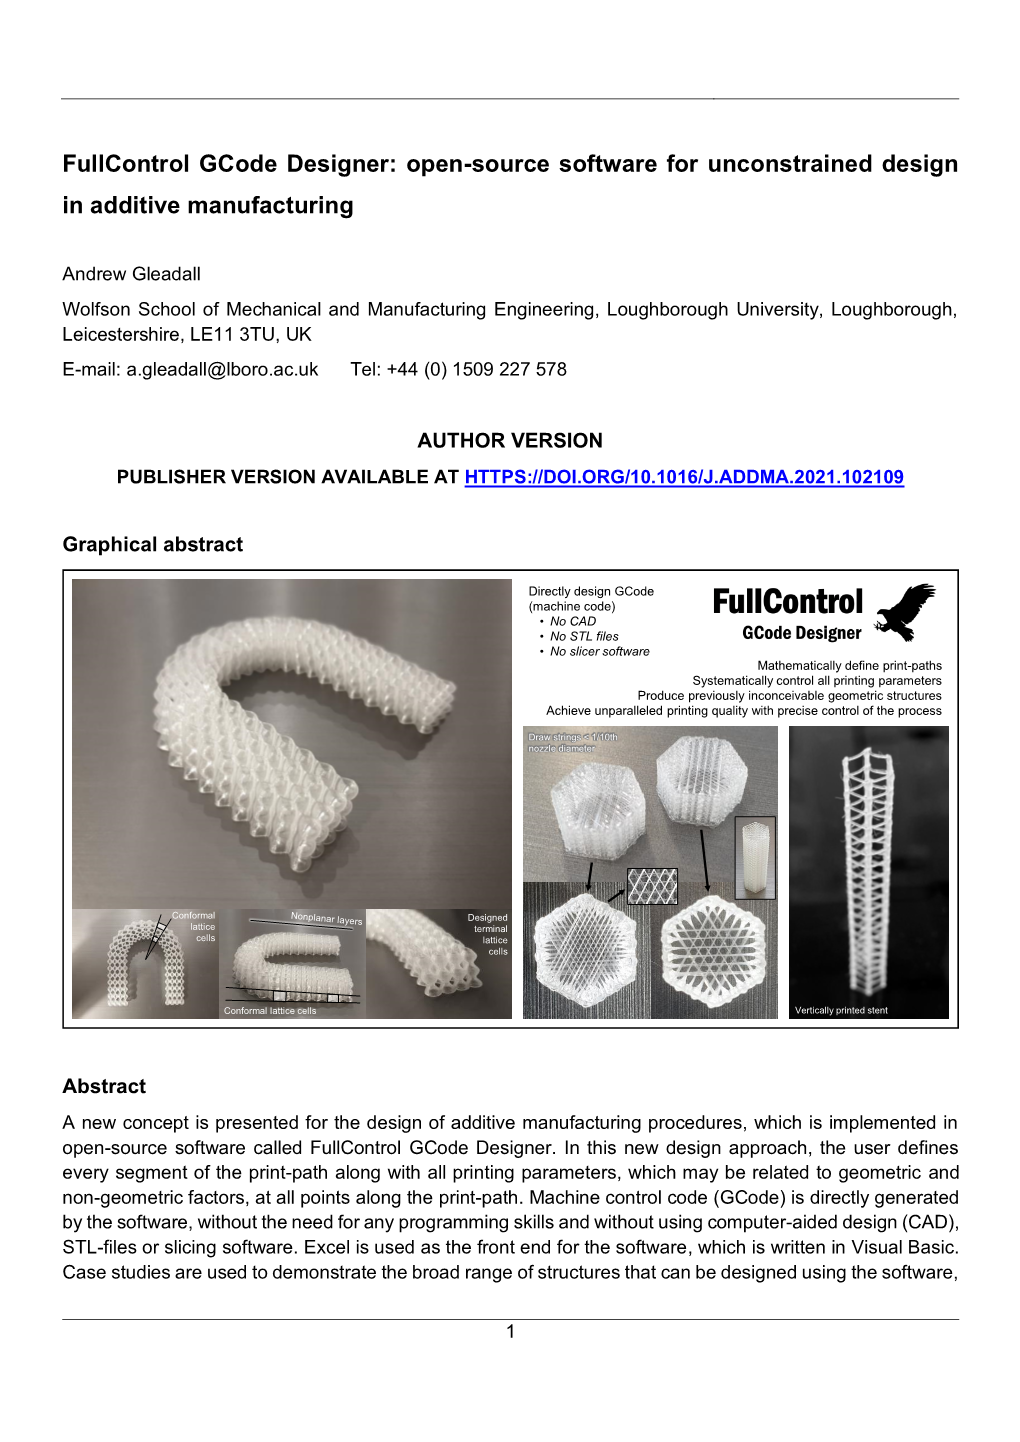 Optimisation of the Surface Porosity of 3D Printed Tissue Engineering